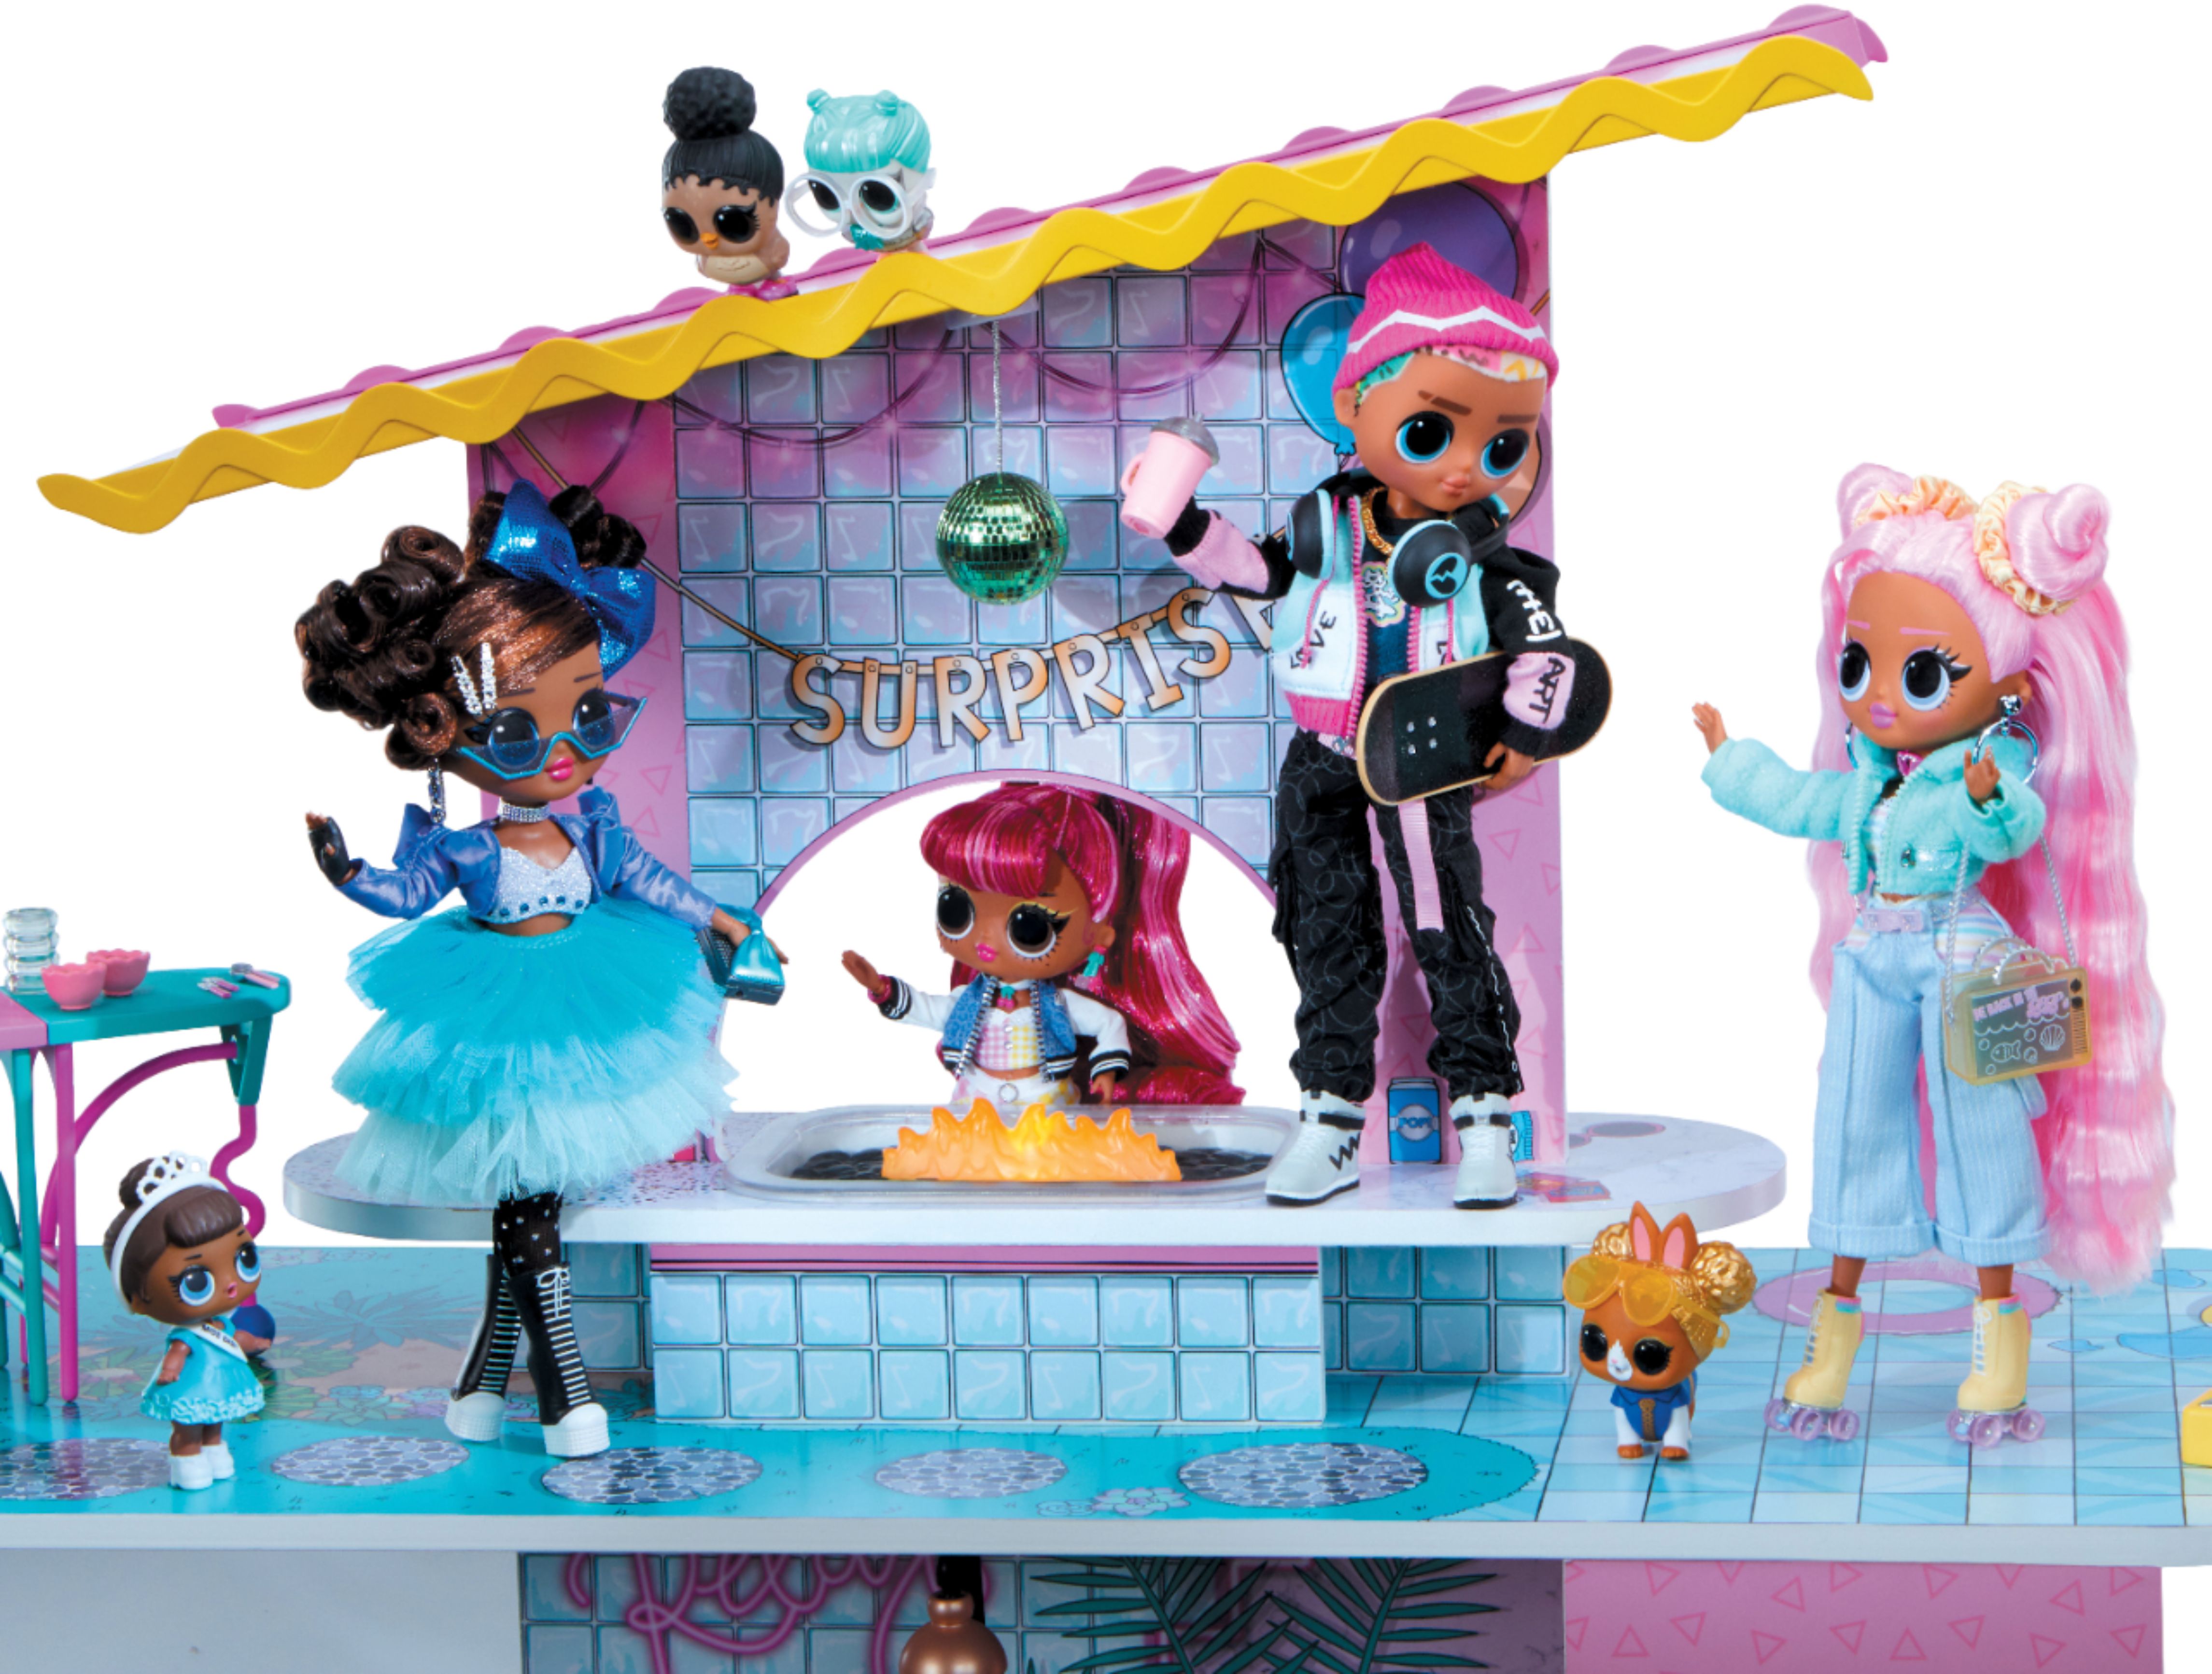 L.O.L. Surprise! House Of Surprises! to air on PopToy World Magazine